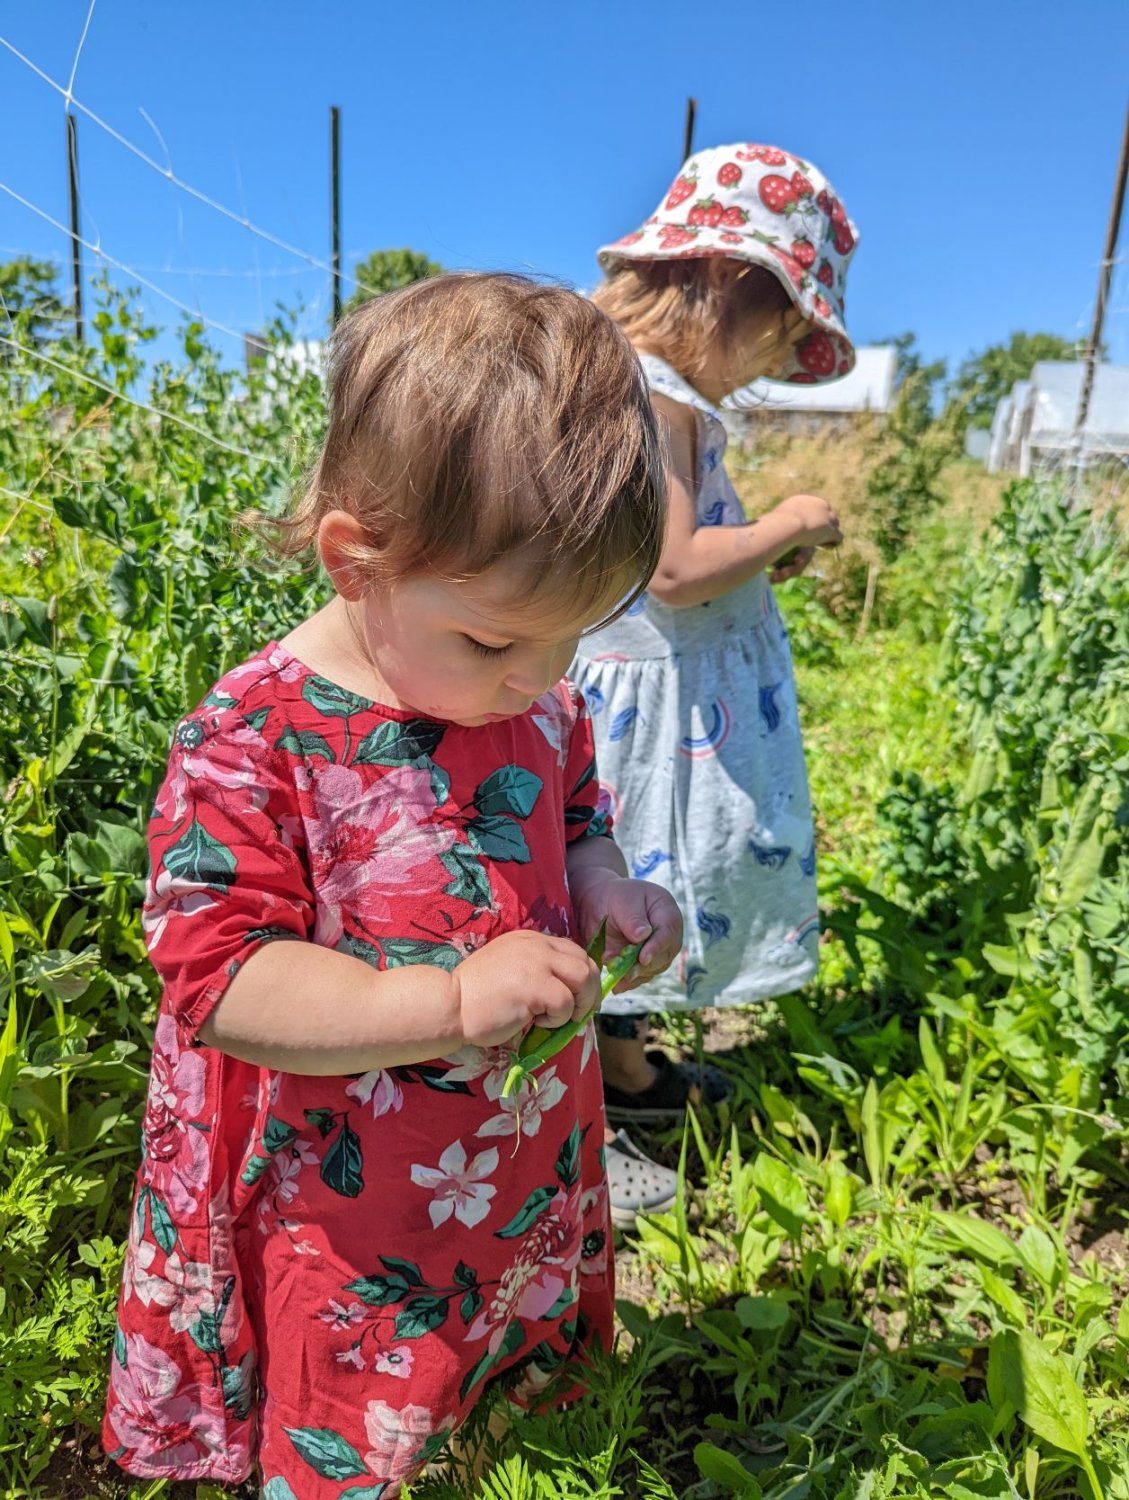 Previous Happening: 2022 Farm Share Week 4 - Welcome Summer